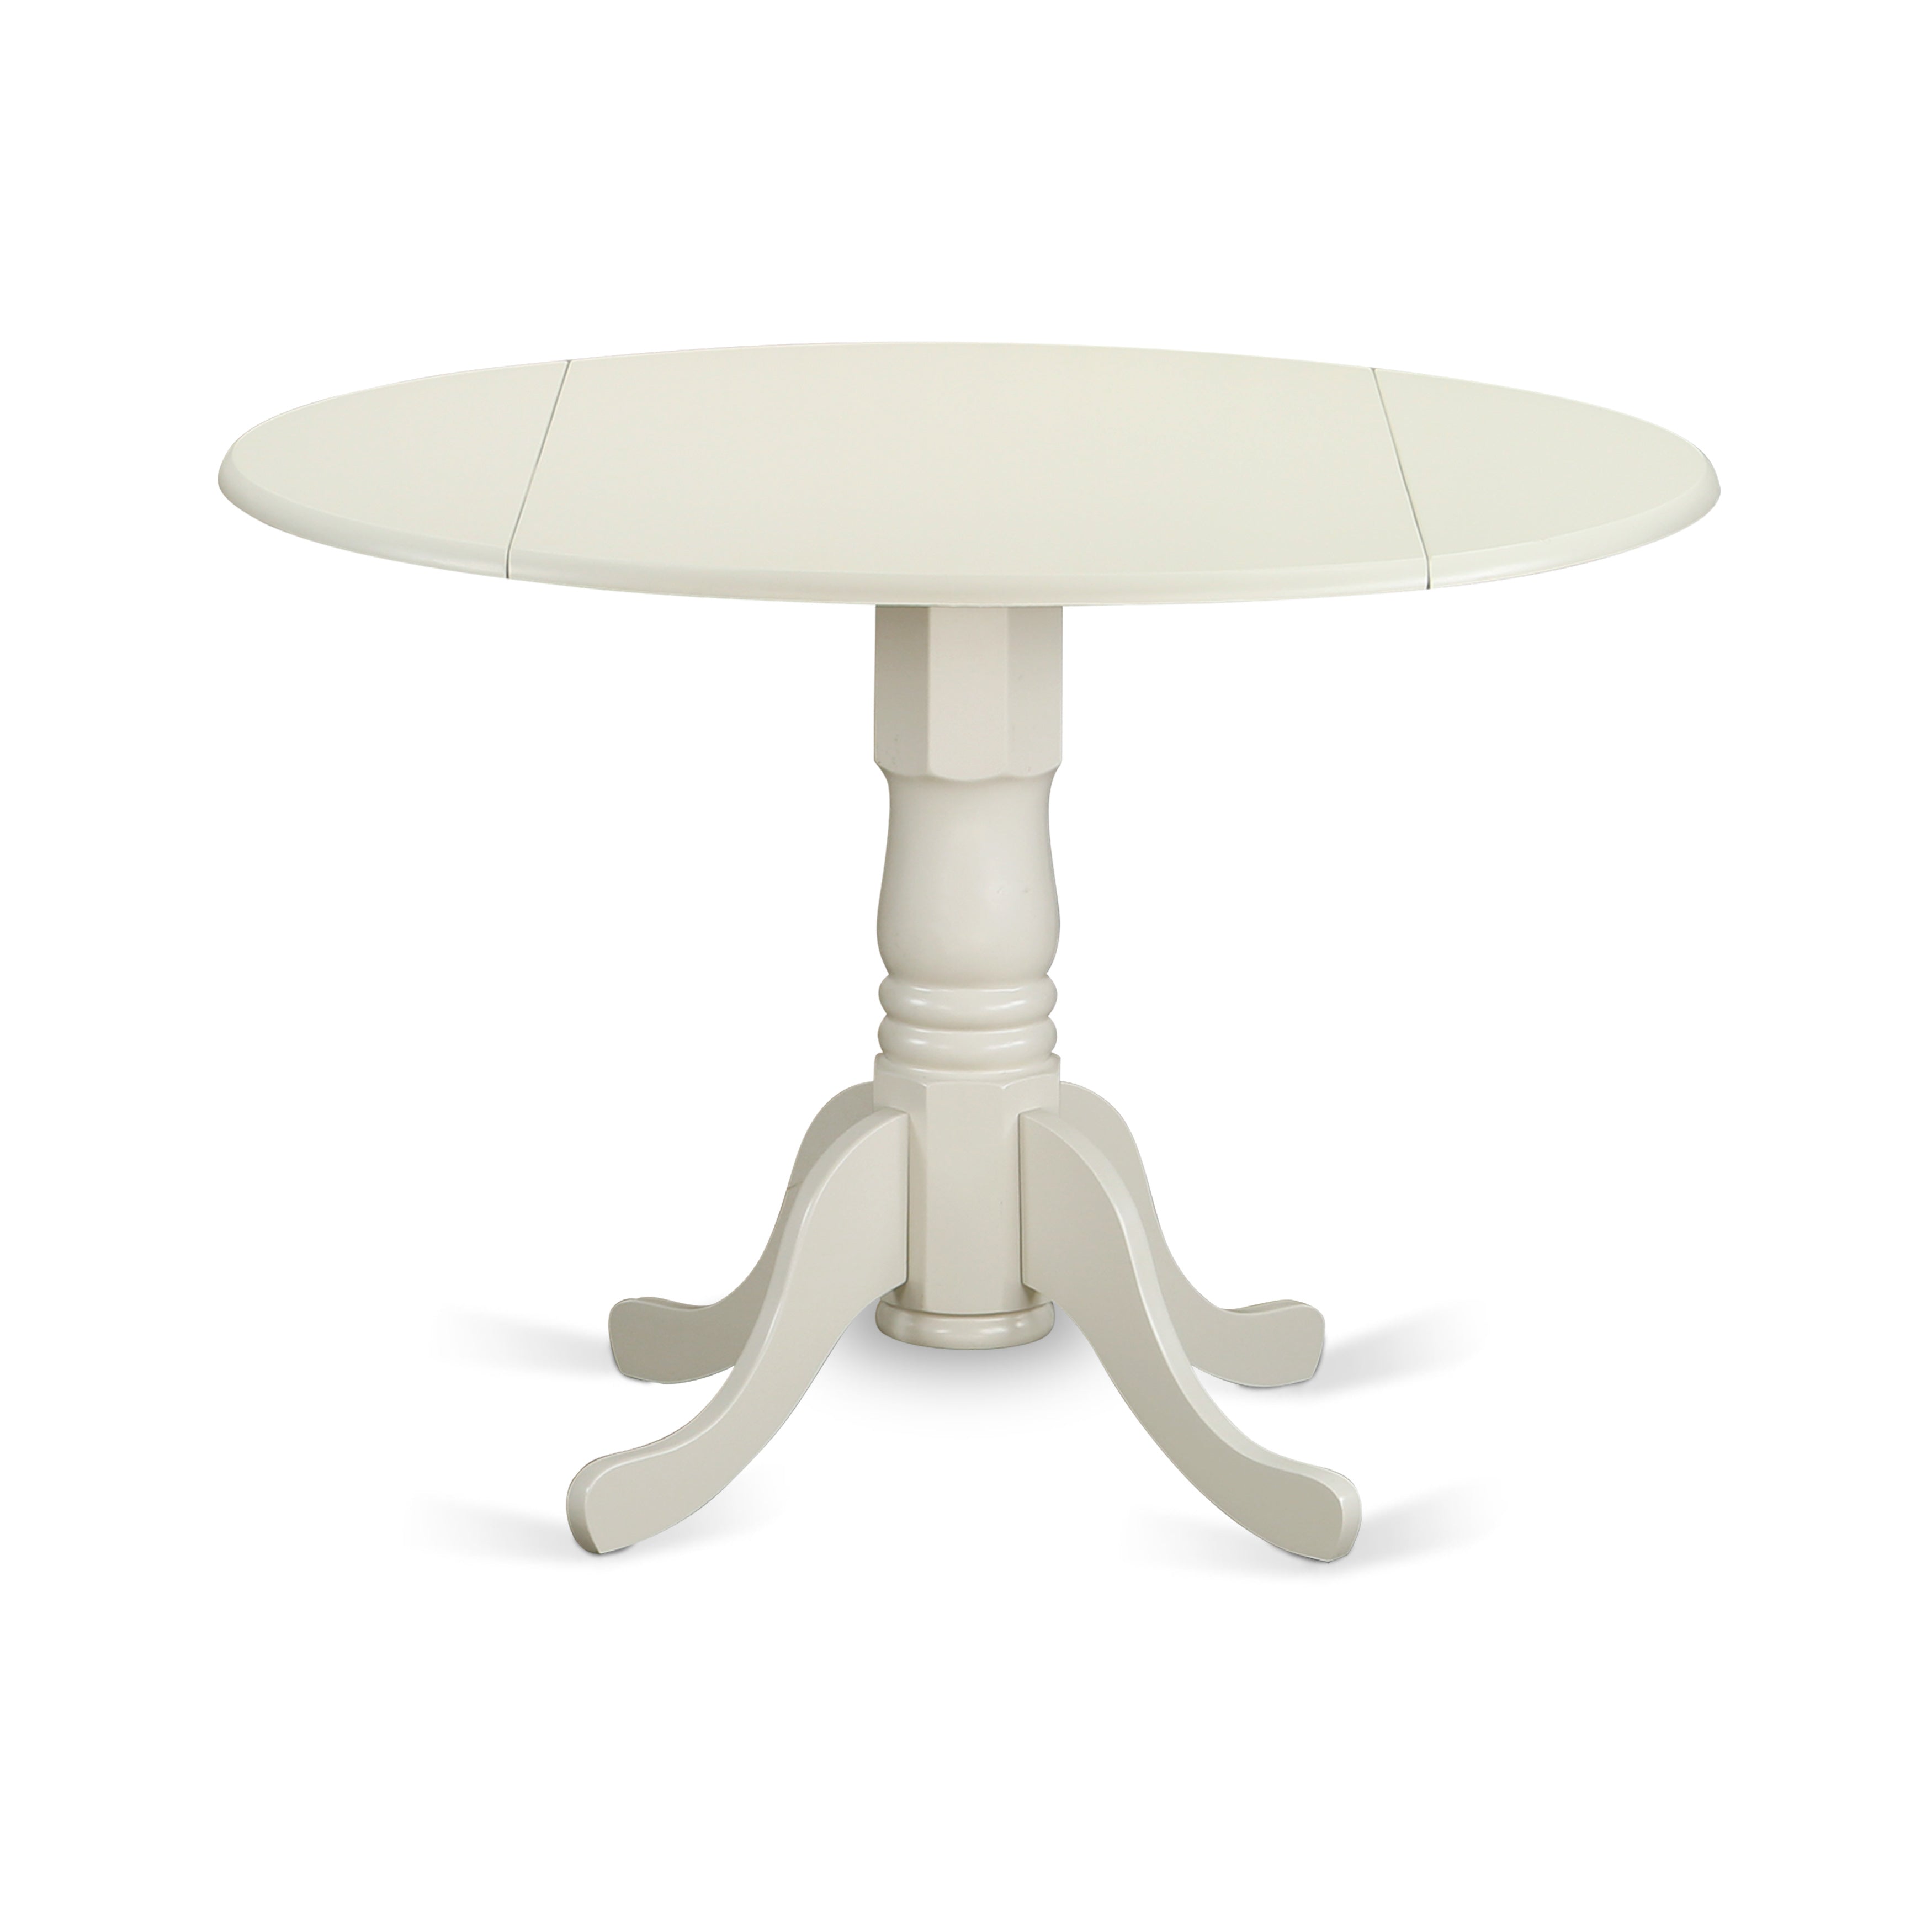 DLDR3-LWH-07 3Pc Round 42 Inch Dining Table With Two 9-Inch Drop Leaves And Two Parson Chair With Linen White Finish Leg And Linen Fabric- Gray Color